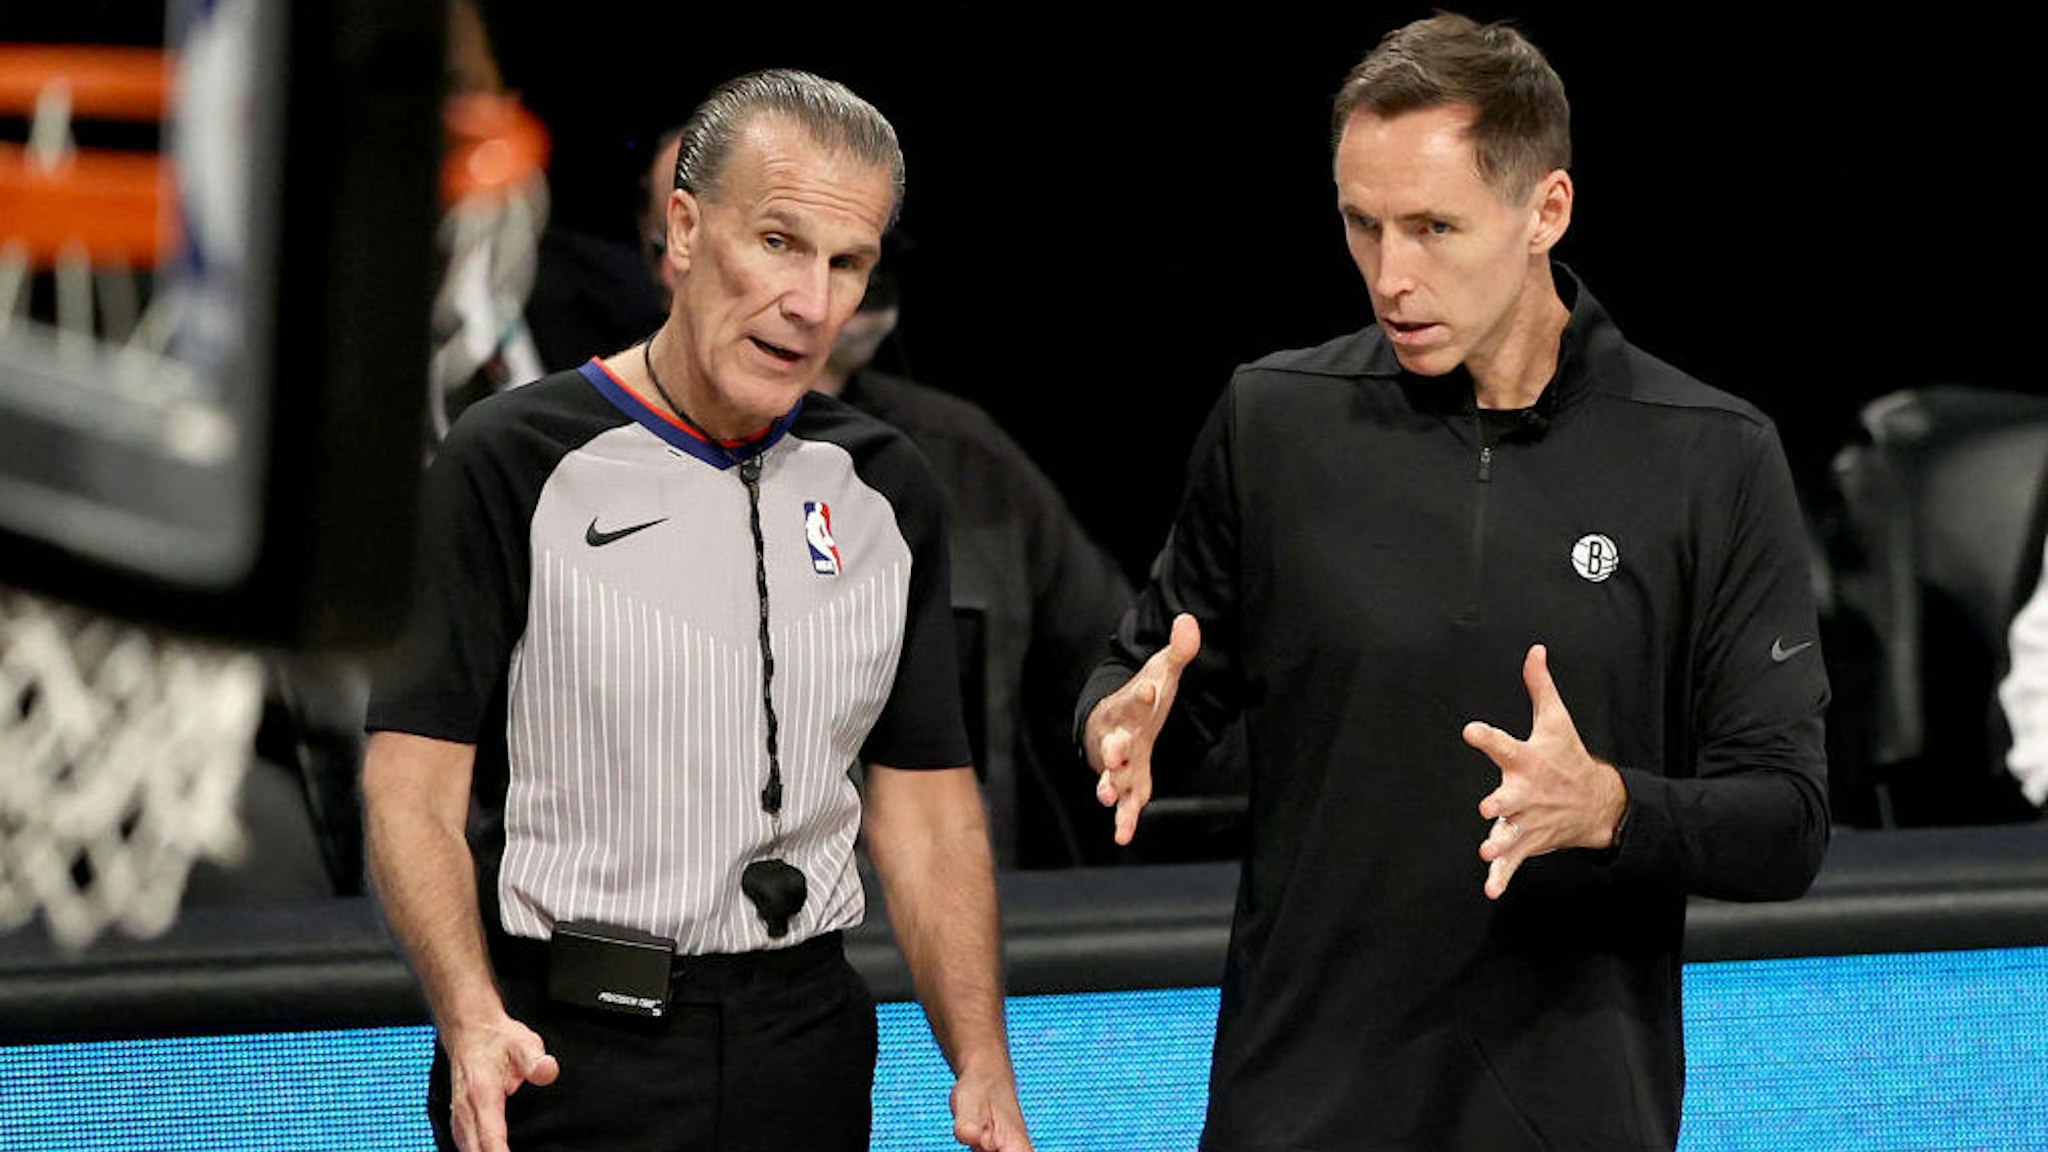 NEW YORK, NEW YORK - JUNE 15: Head coach Steve Nash talks with referee Ken Mauer #41 during game 5 of the Eastern Conference second round at Barclays Center on June 15, 2021 in the Brooklyn borough of New York City. NOTE TO USER: User expressly acknowledges and agrees that, by downloading and or using this photograph, User is consenting to the terms and conditions of the Getty Images License Agreement. (Photo by Elsa/Getty Images)